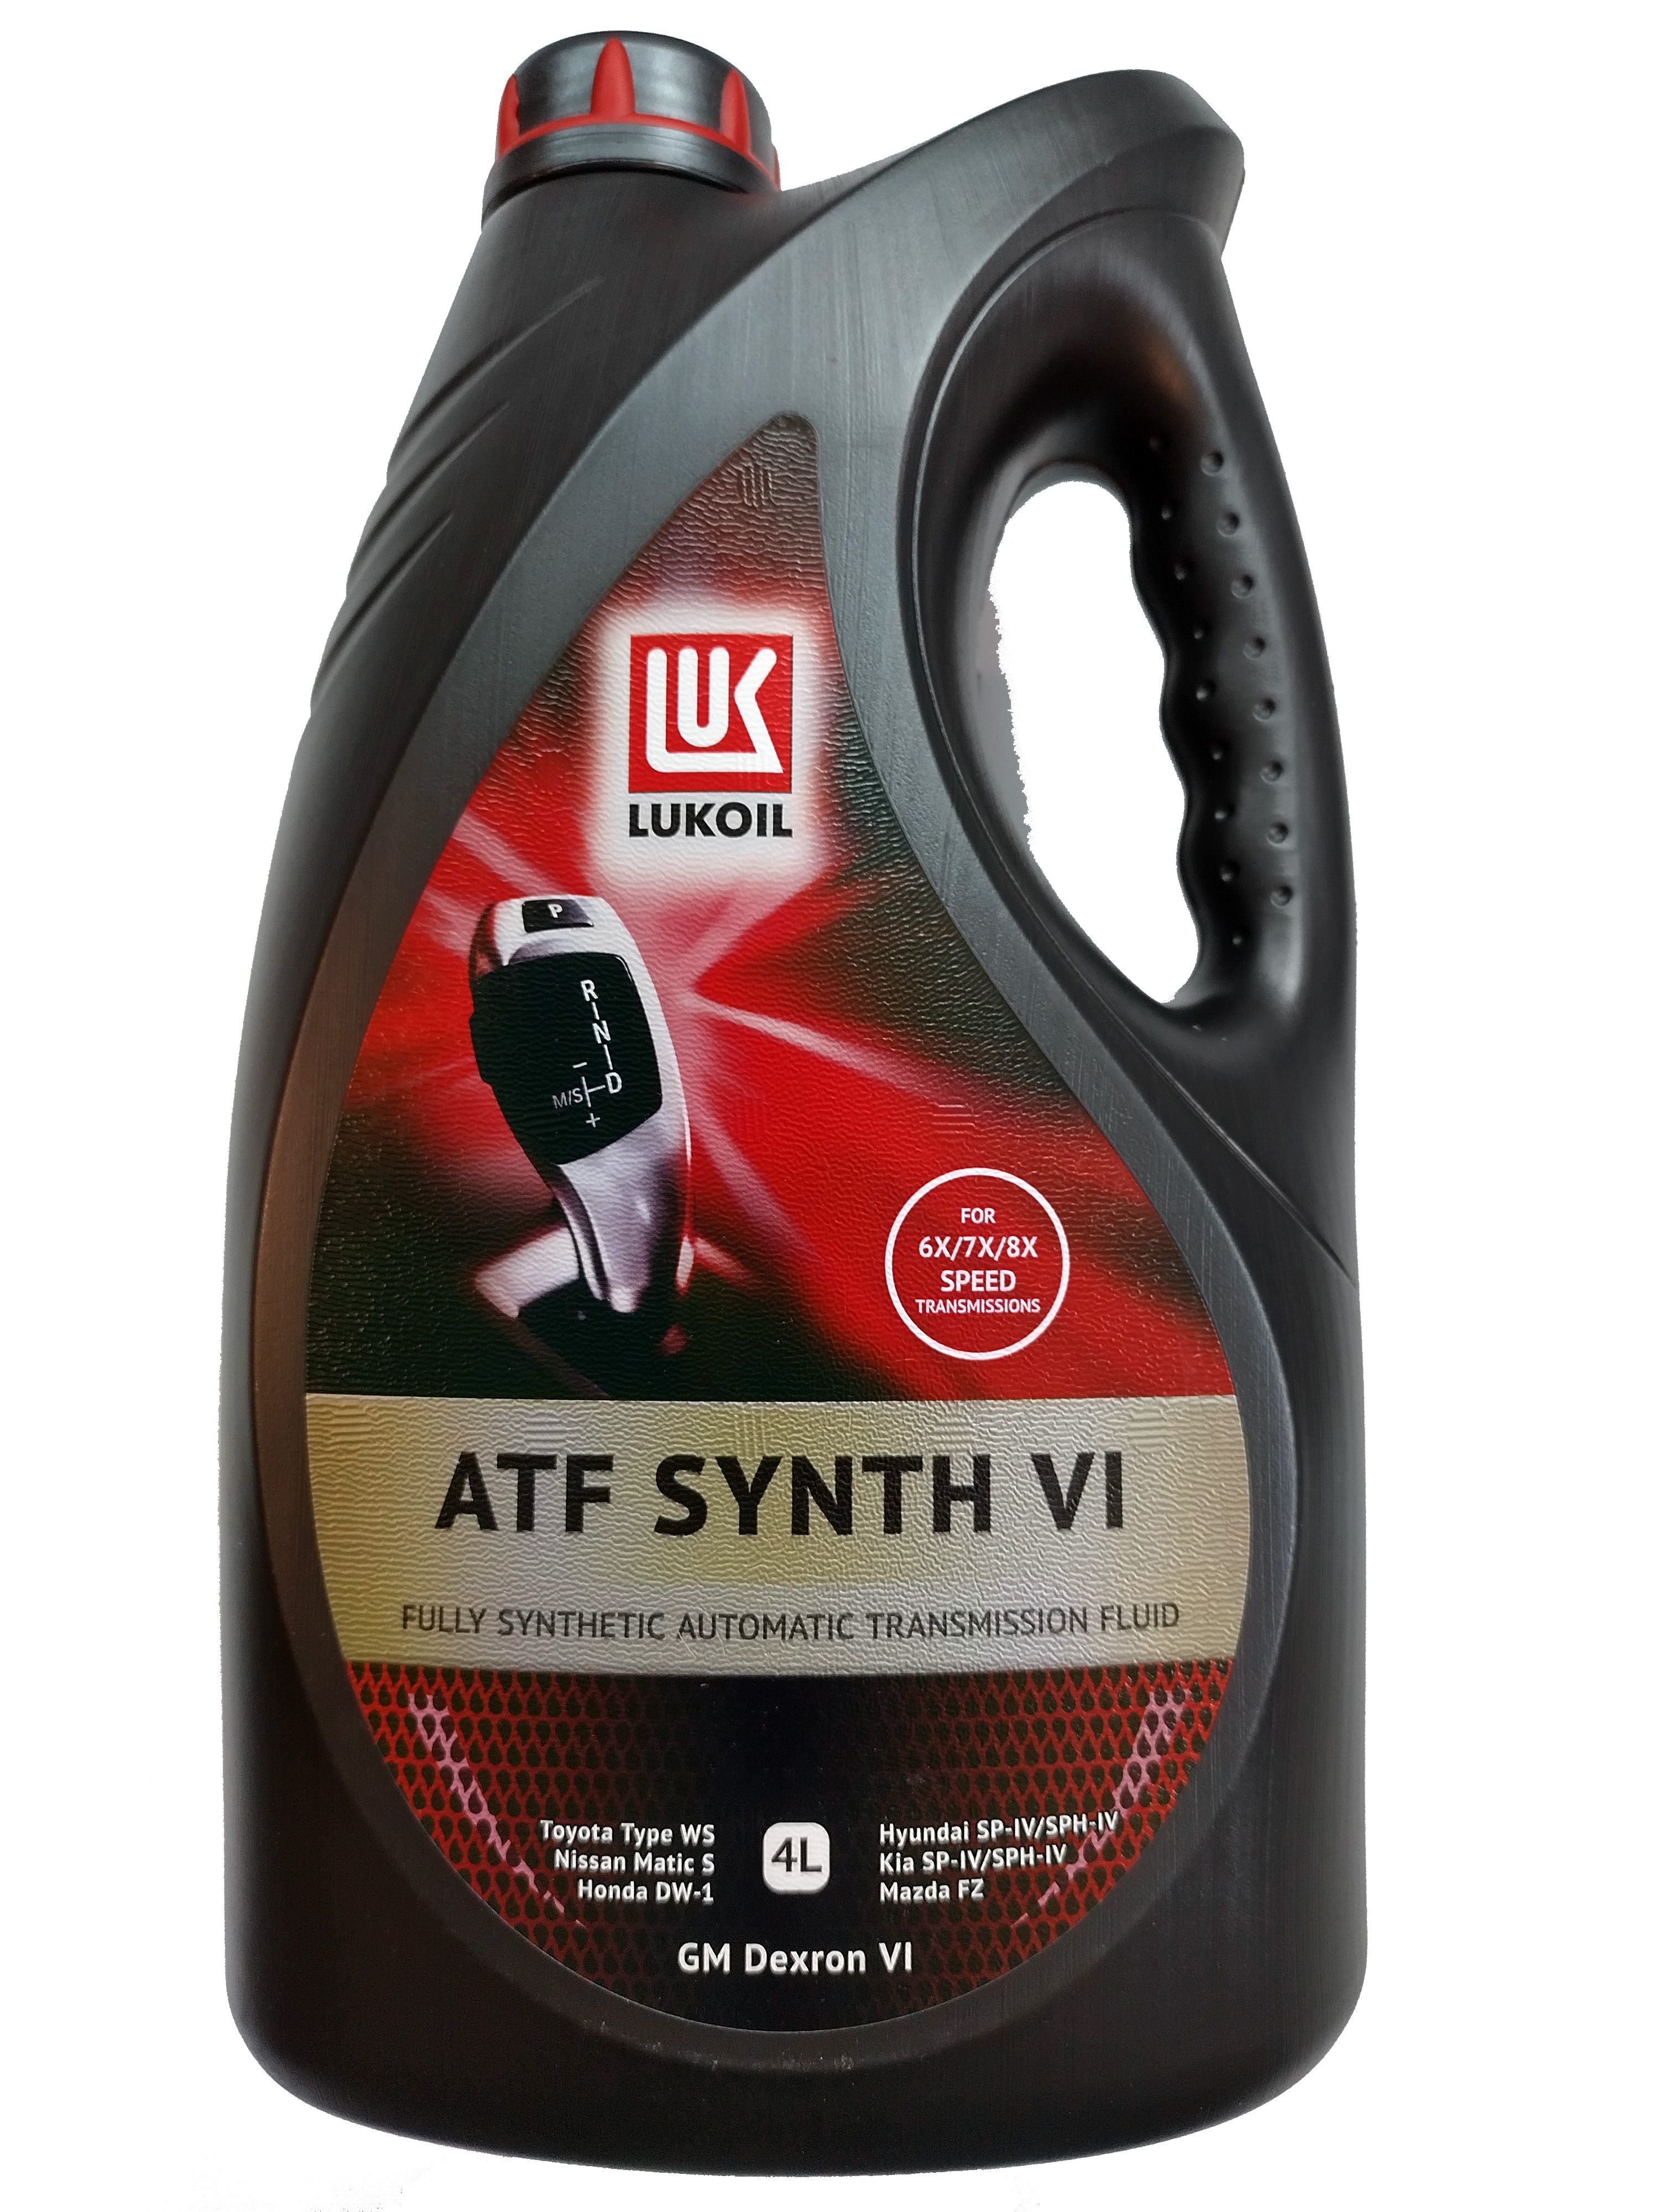 Лукойл ATF Synth vi. Масло Лукойл АТФ декстрон 6 4л. Lukoil ATF Synth 6 216. Лукойл ATF Synth Multi 4л.